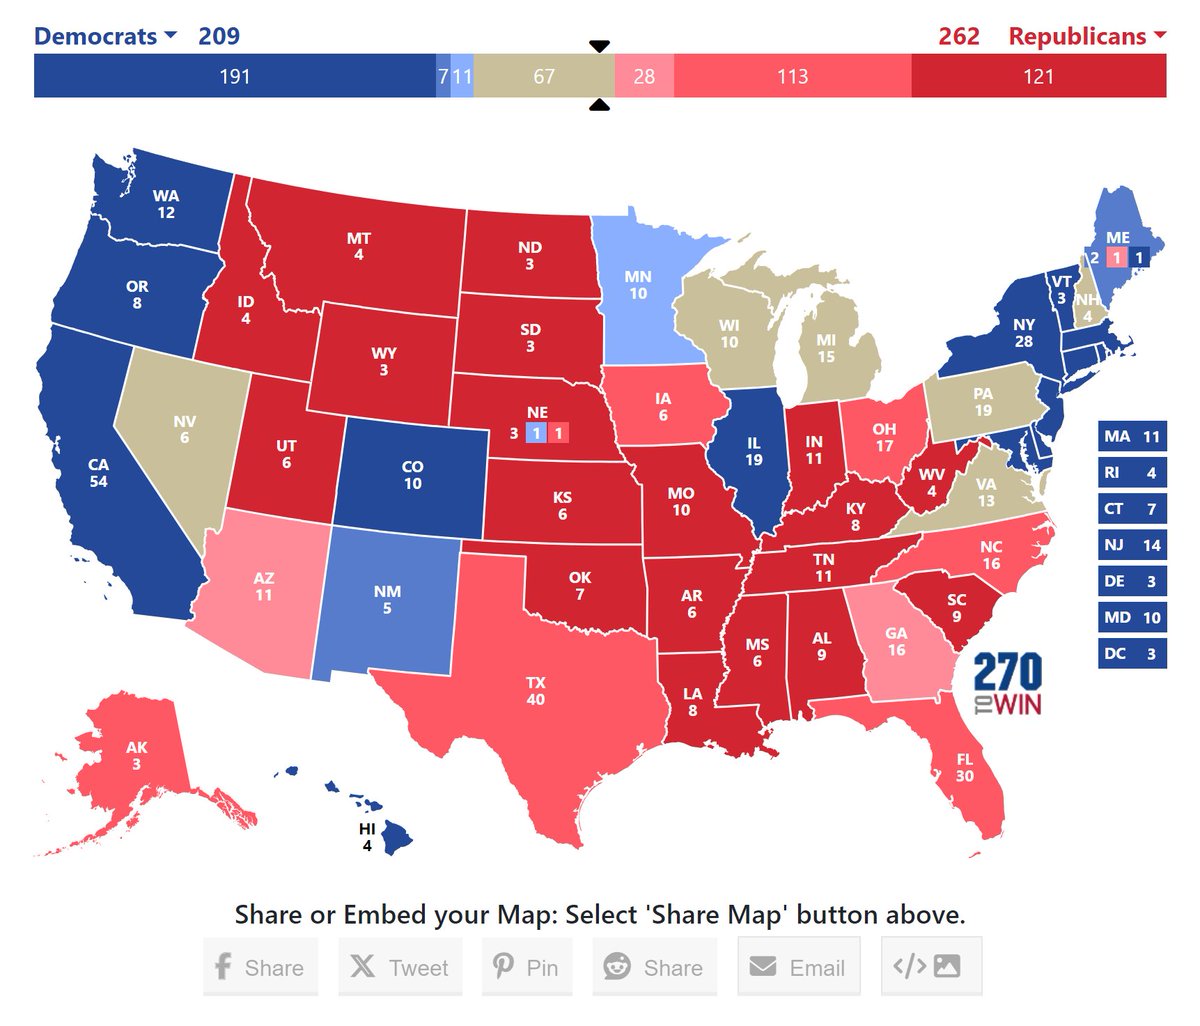 My current electoral map. If nothing else changes, it would be difficult for Trump to not go over 270 and win.